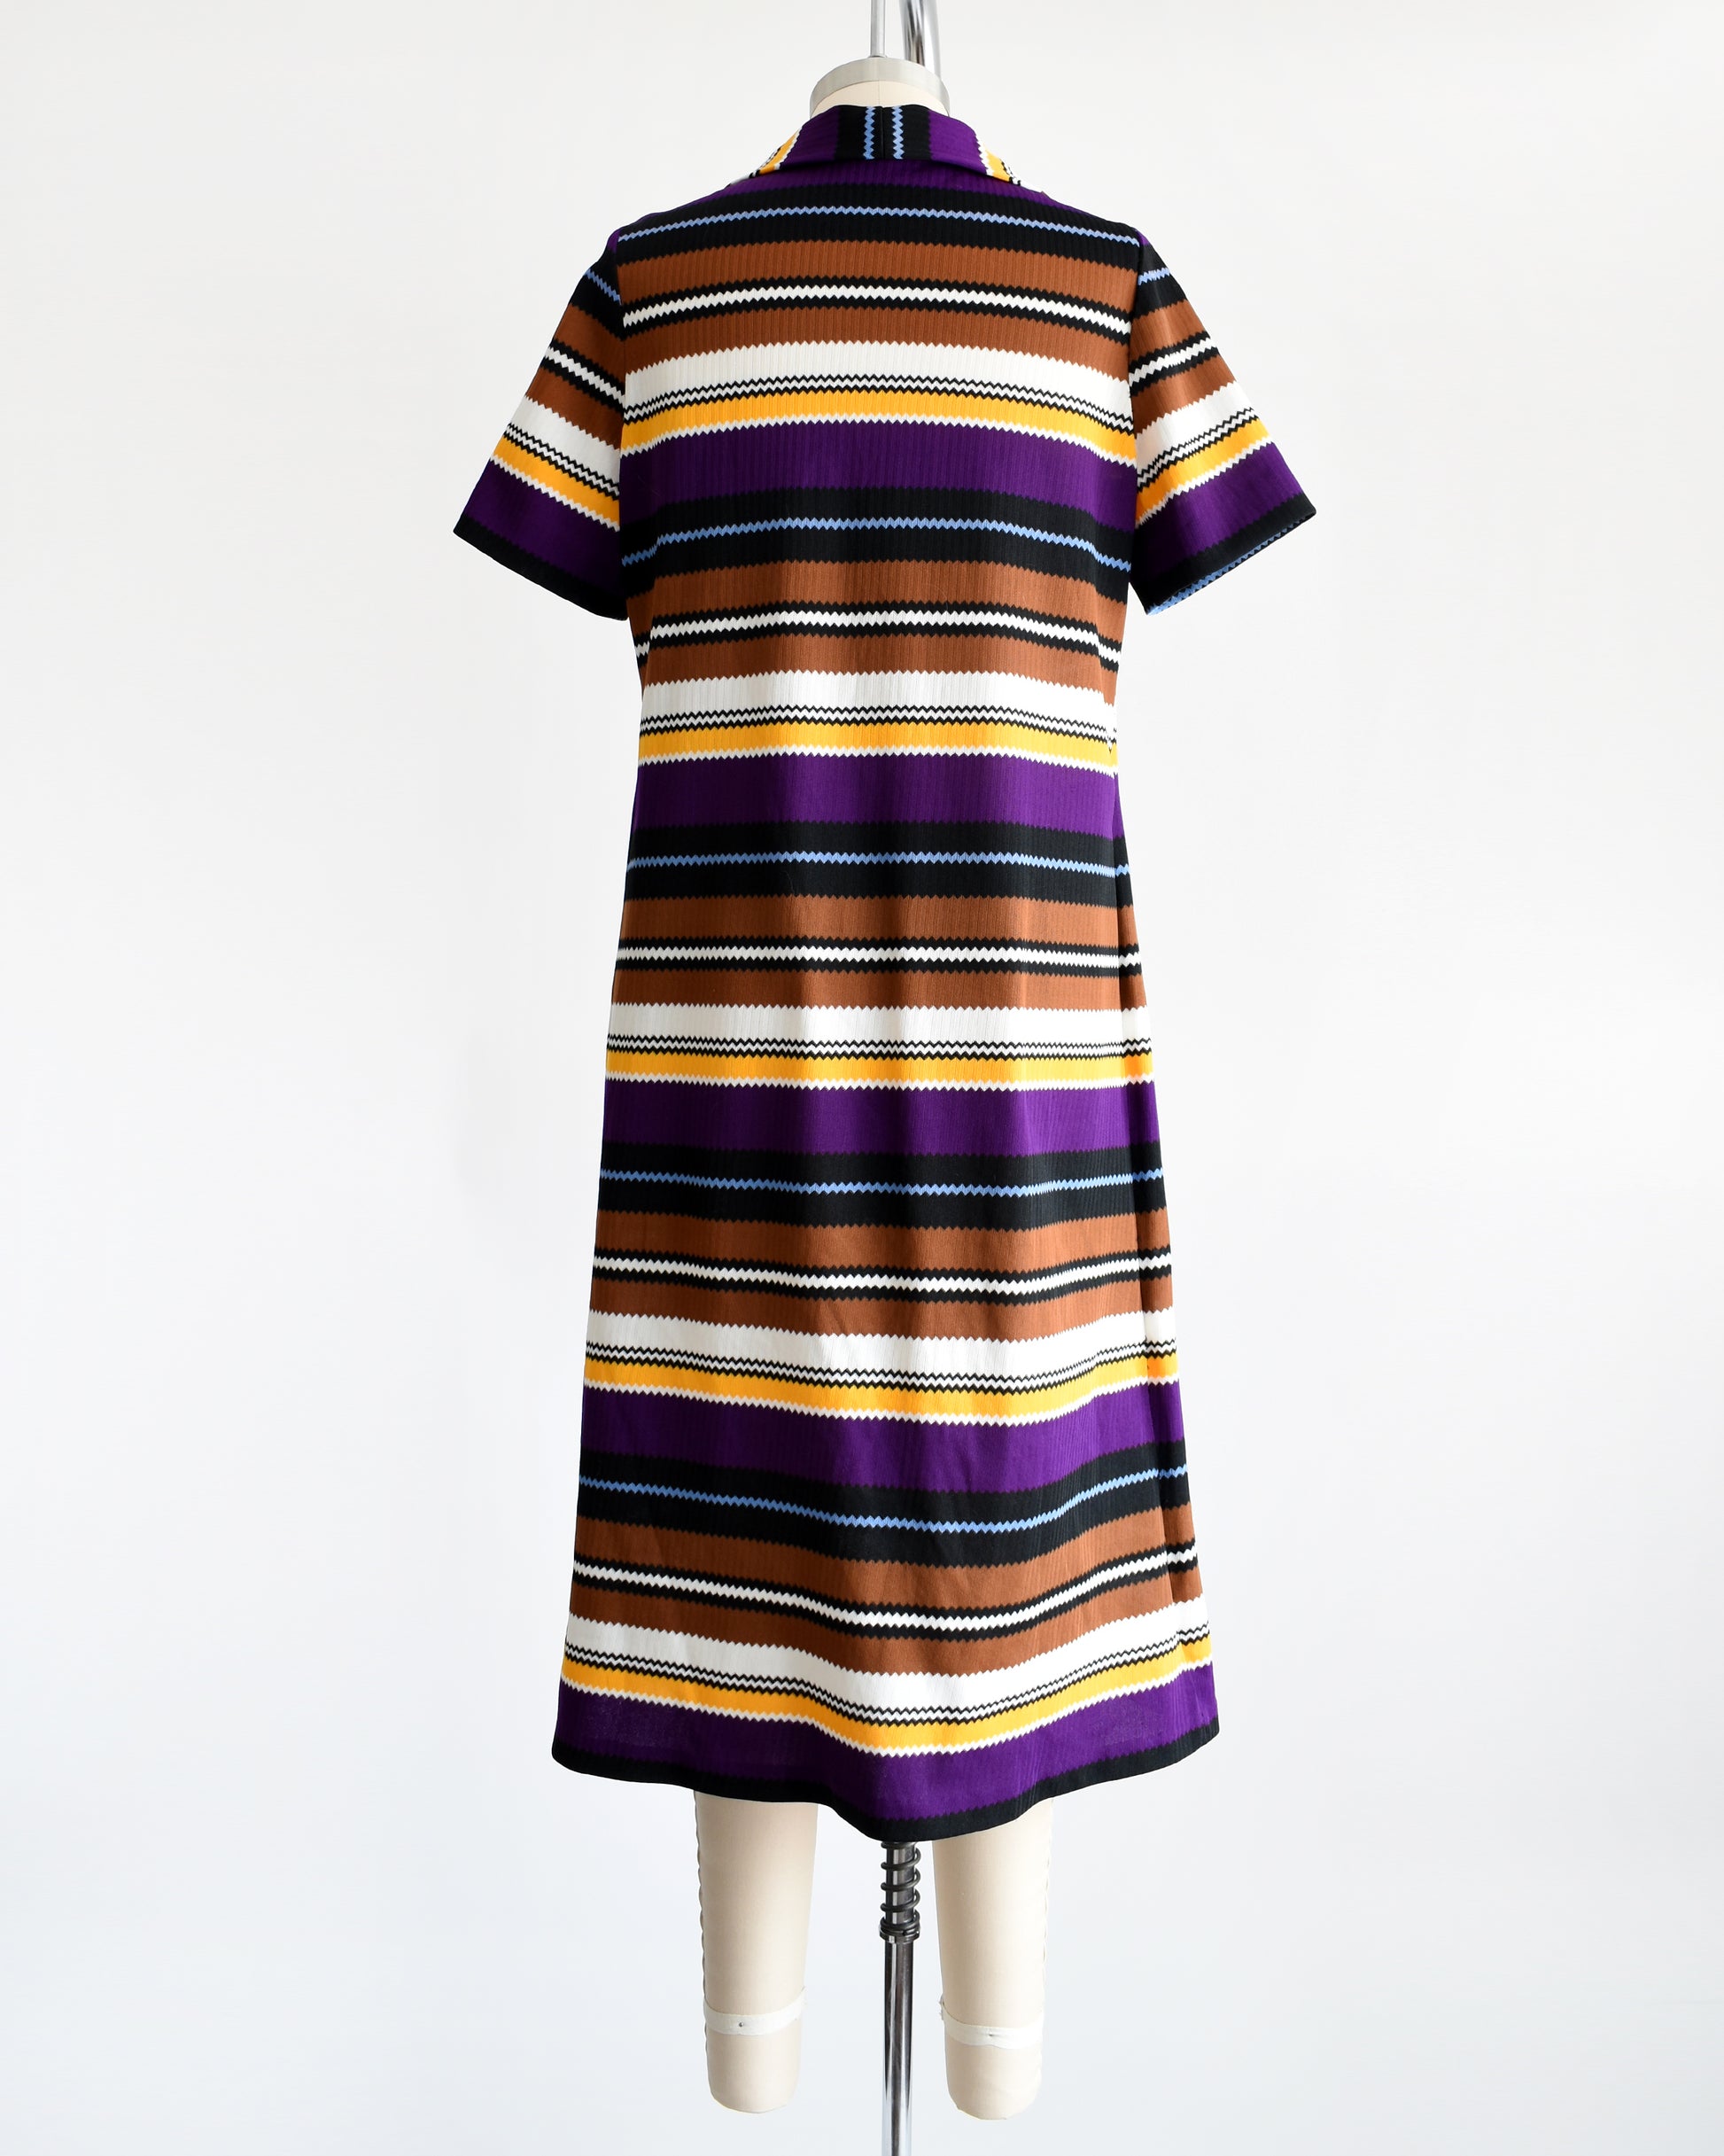 Back view of a vintage 1970s striped mod dress that has black, brown, white, blue, yellow, and purple horizontal stripes with zigzag edges.